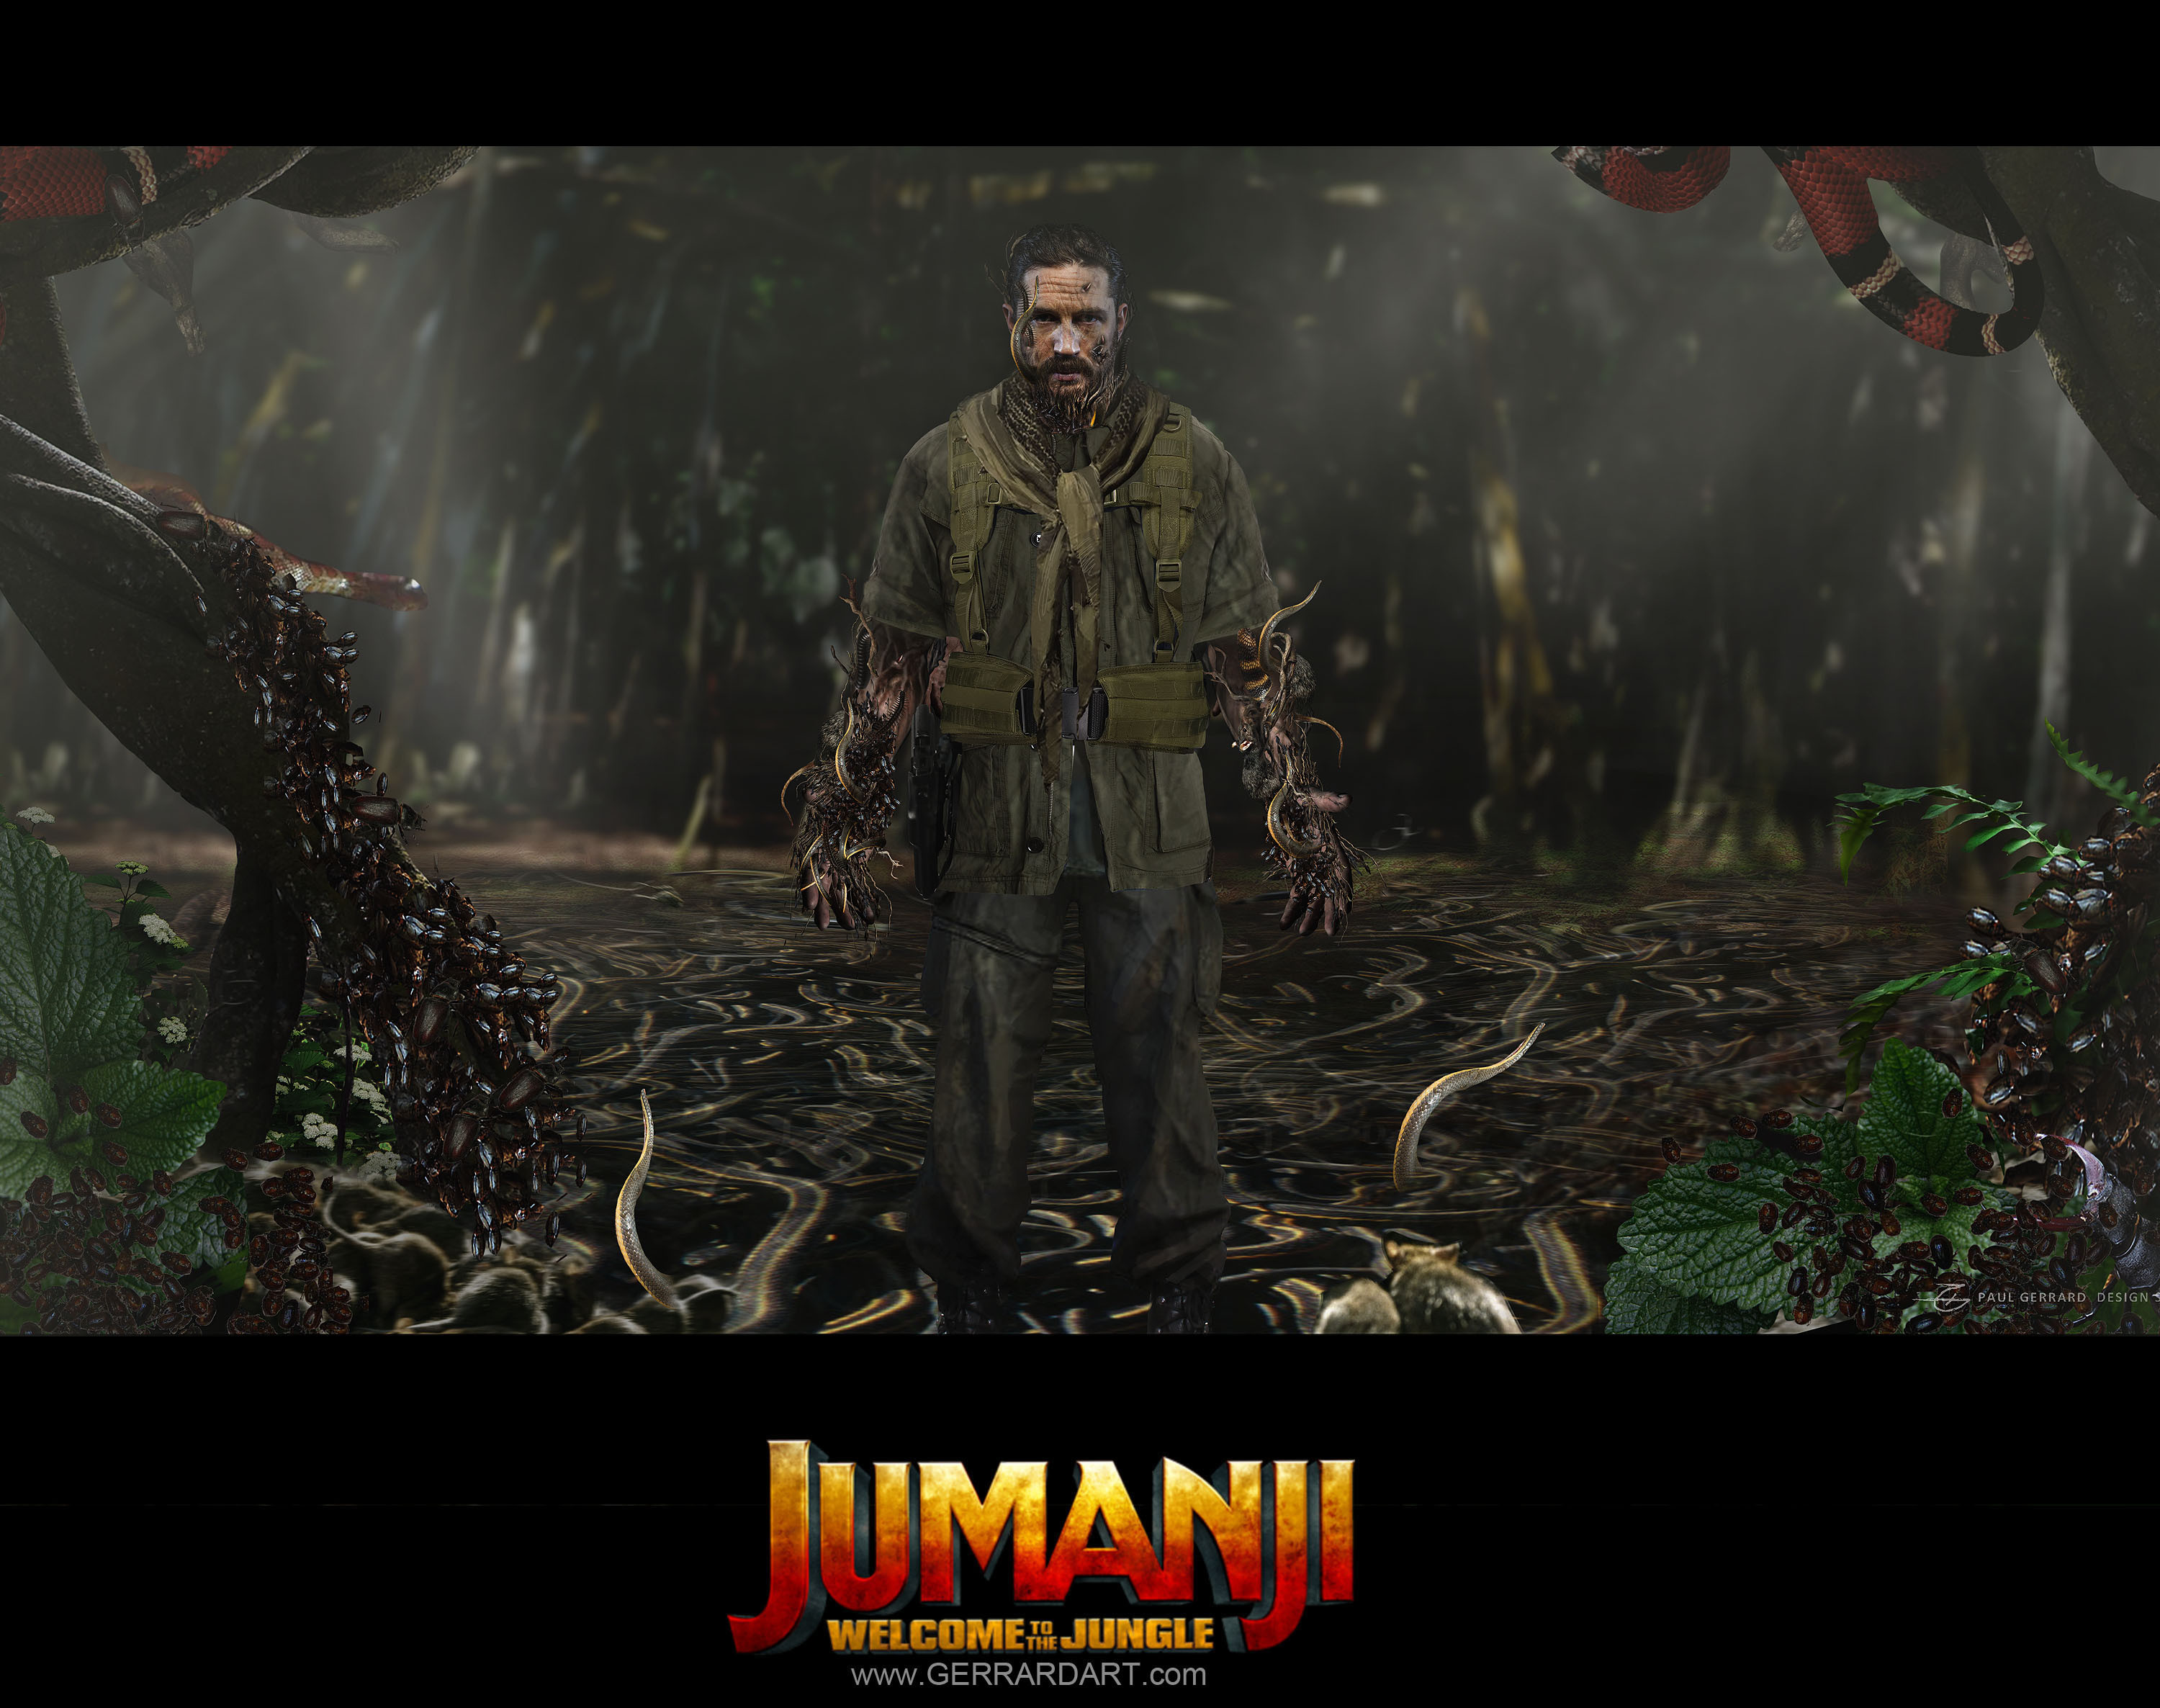 Previously unreleased concept art from the movie JUMANJI. I believe some of these scenes where cut and using an actor that never got cast.
www.GERRARDART.com